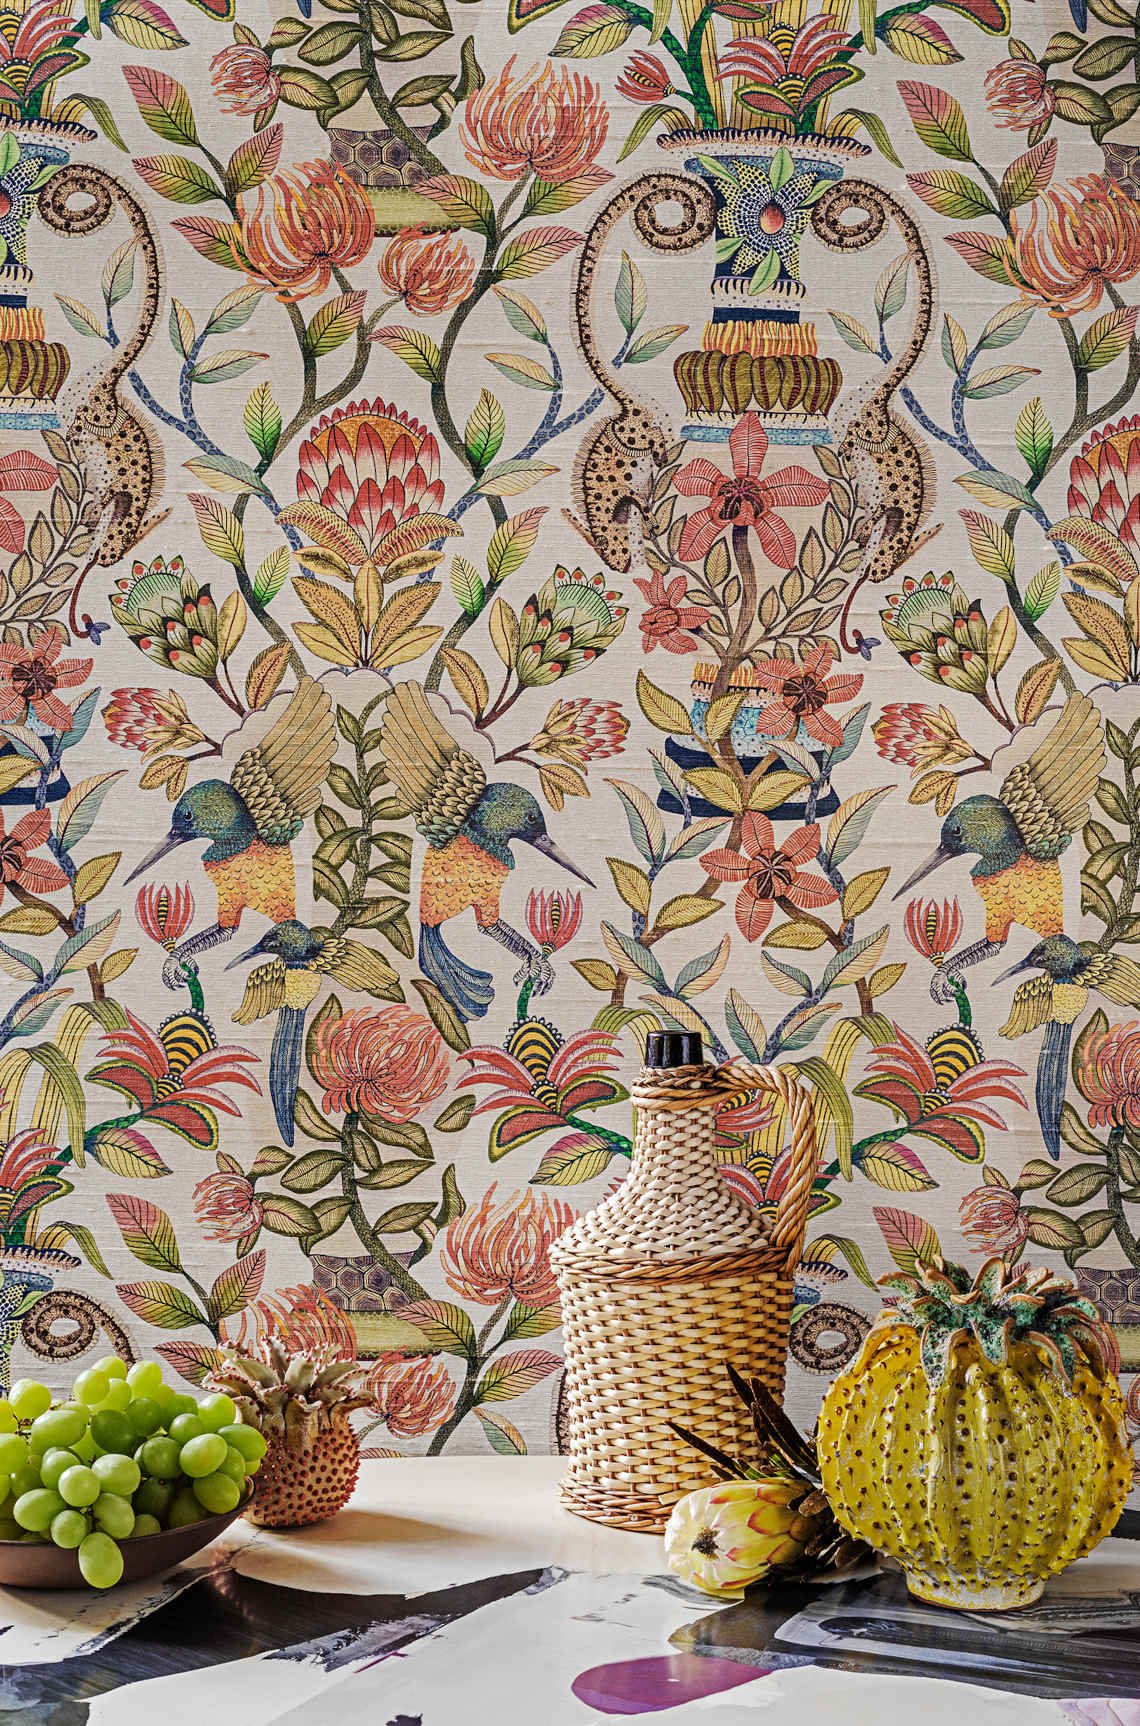 Protea Garden Silk Wallpaper with African Floral Design by Cole & Son